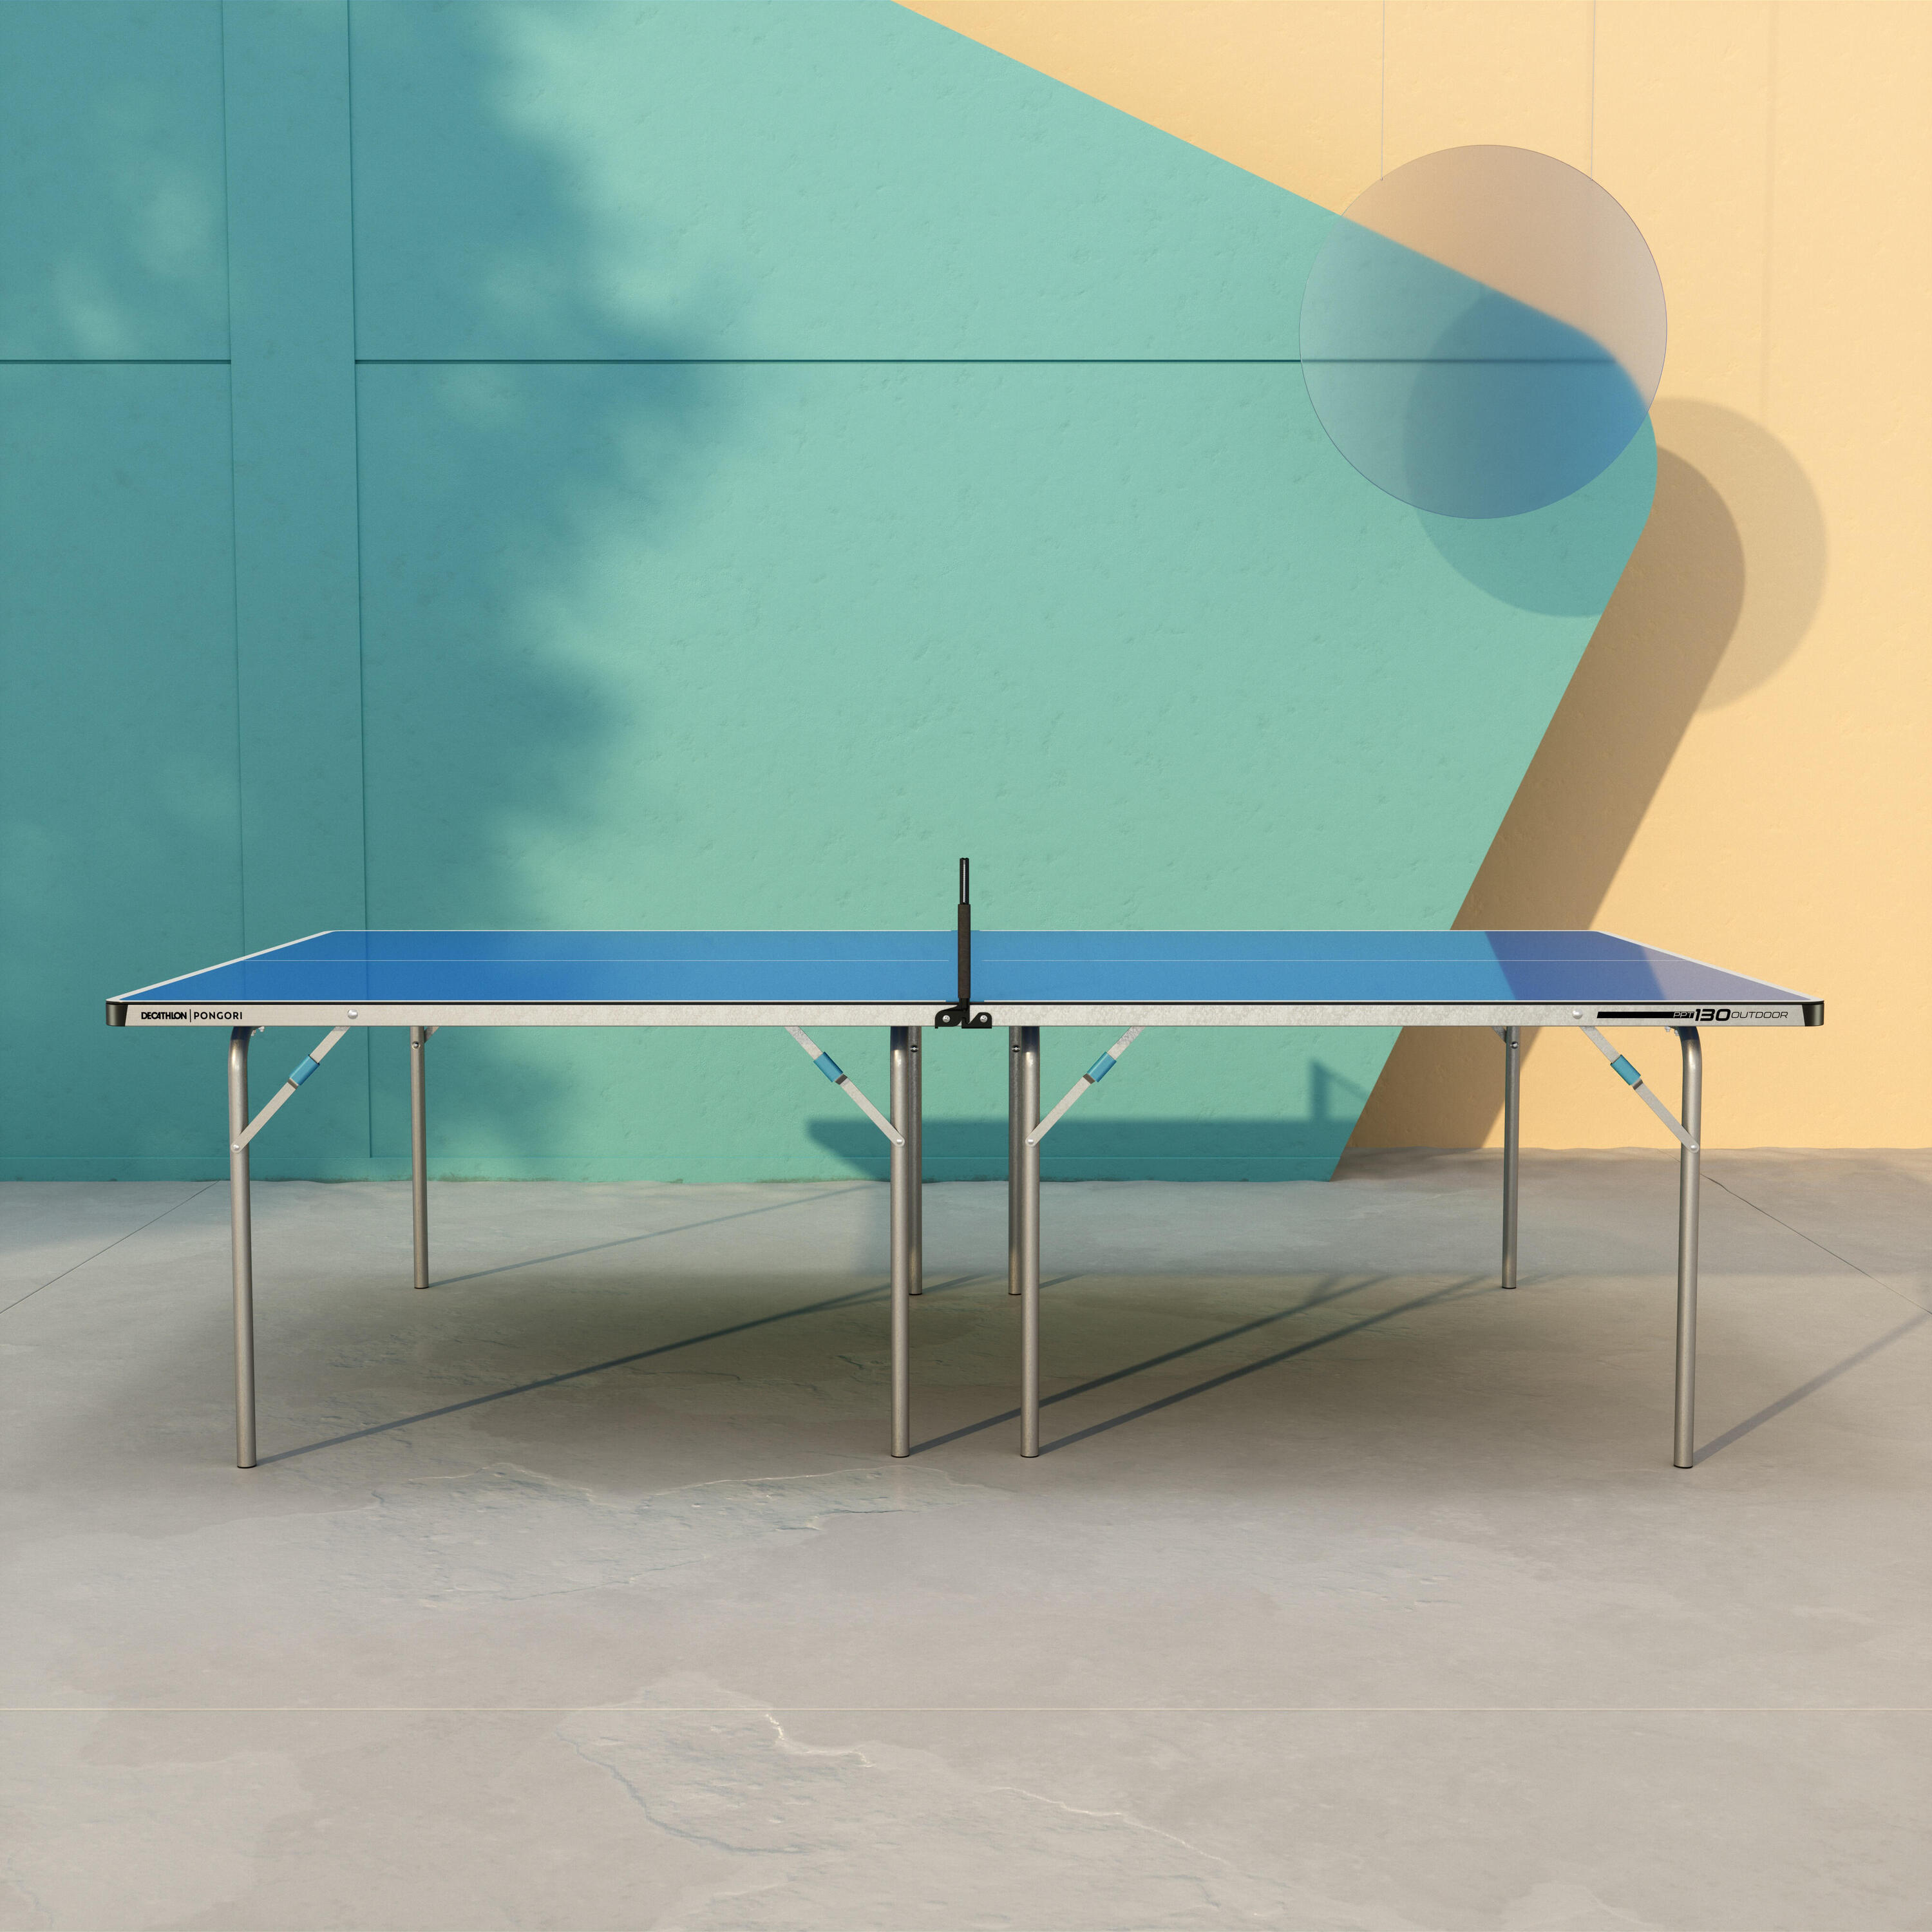 Outdoor Table Tennis Table PPT 130 - Blue 6/11